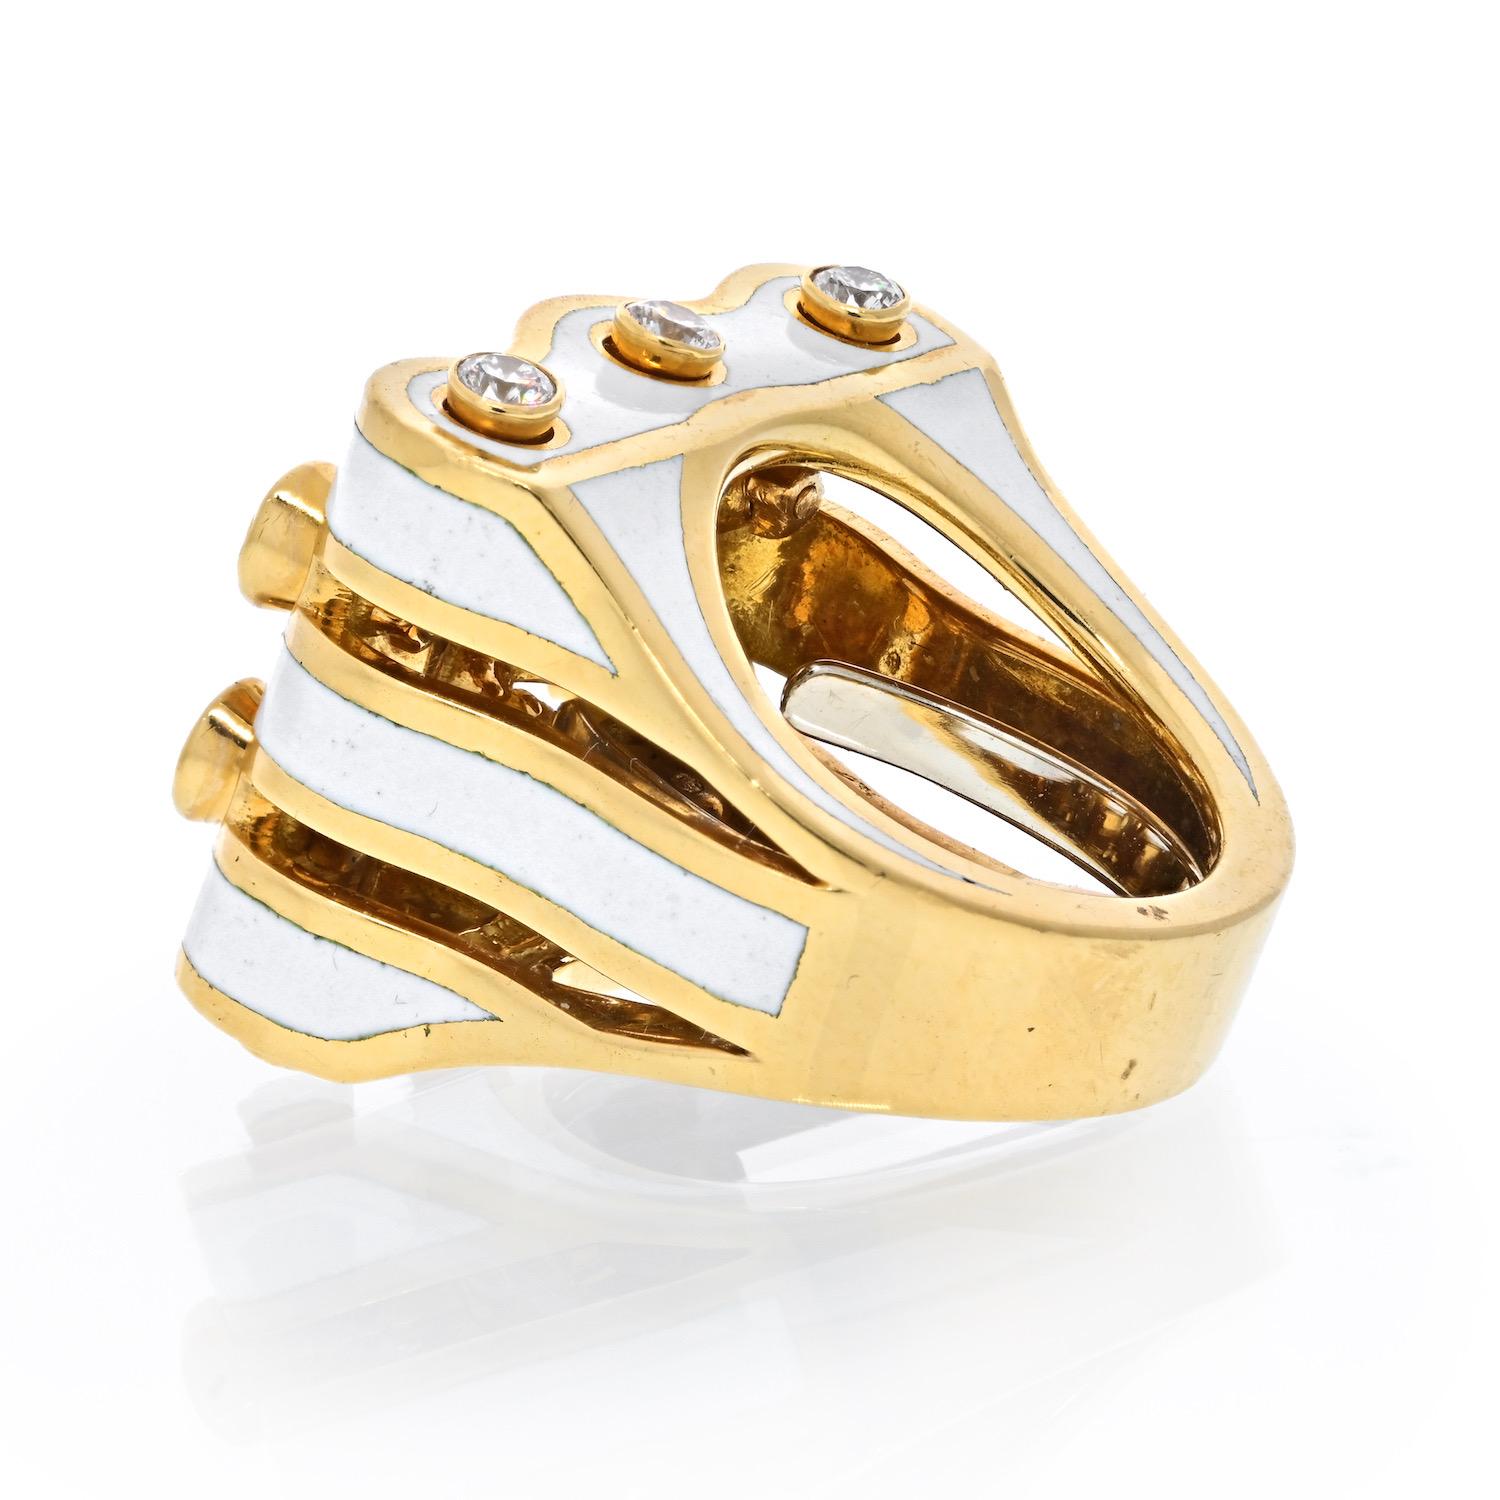 Sexy sophistication was the scaffolding for the design of the #Manhattan Minimalism# Collection. Particularly this fabulous #Wave# ring made of white enamel on 18K gold and platinum featuring gorgeous colet-set diamonds that add the perfect amount